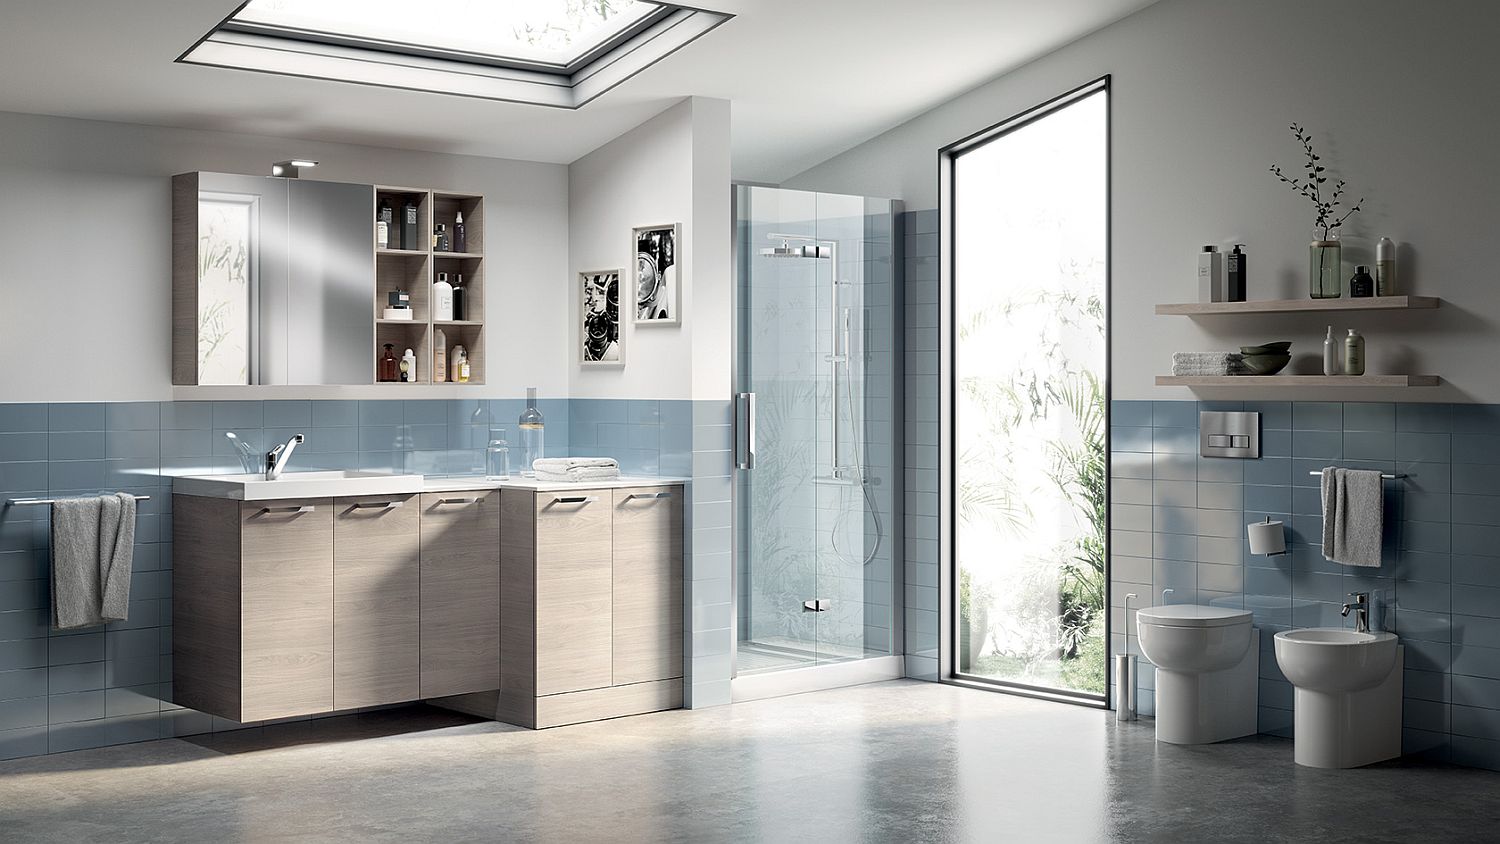 Laundry-Space-combines-the-bathroom-with-a-contemporary-laundry-room